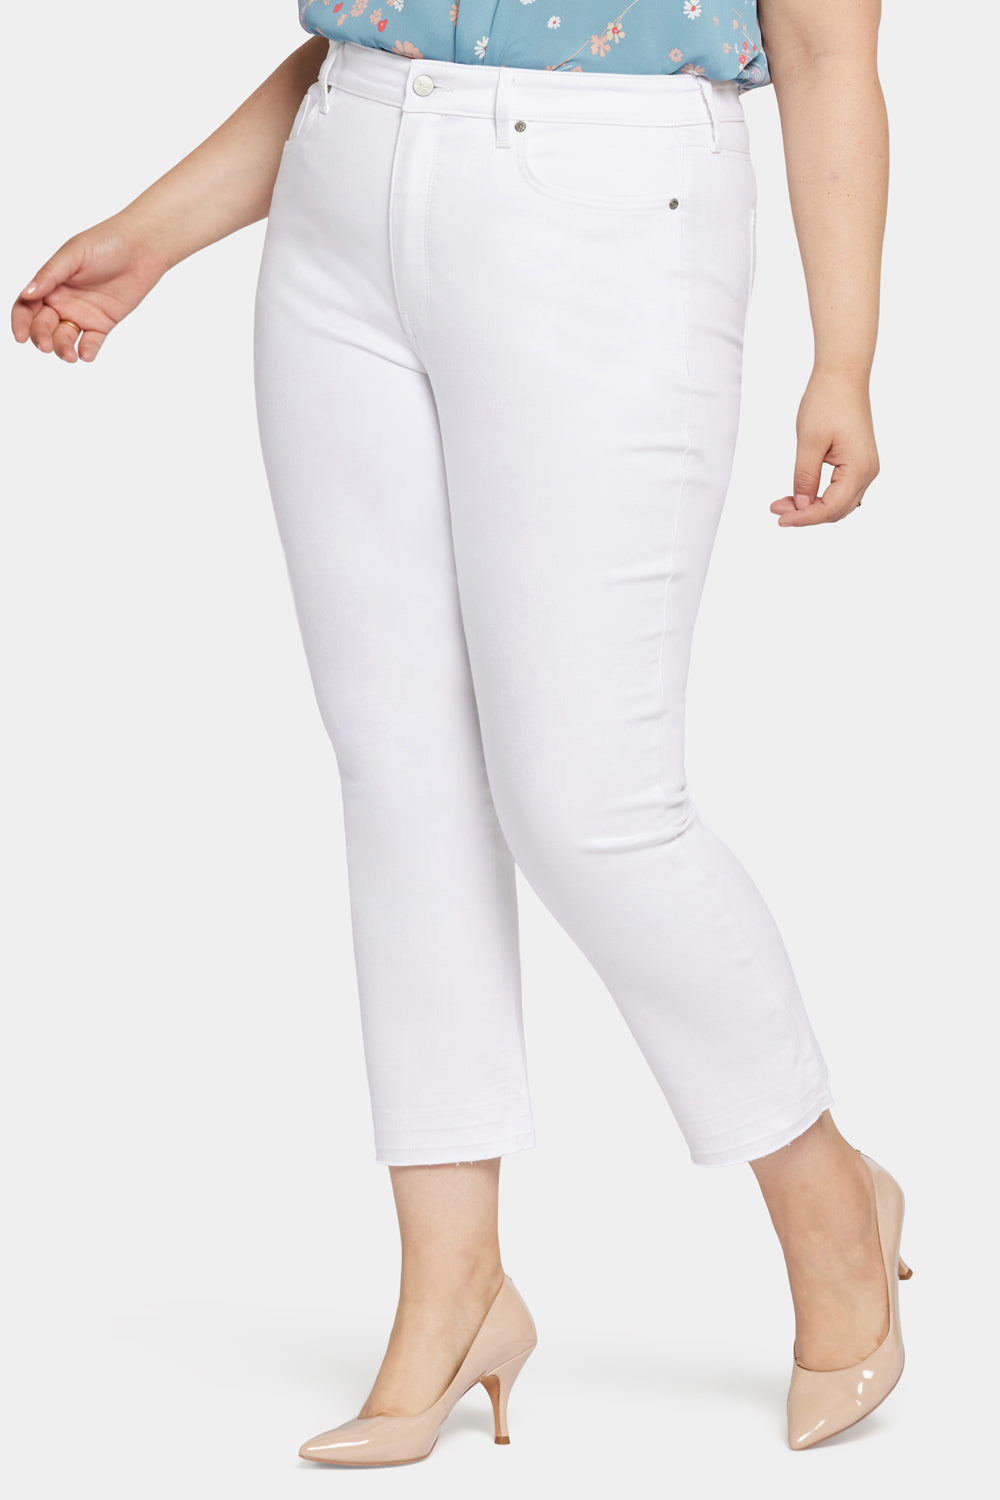 NYDJ Marilyn Straight Ankle Jeans In Petite Plus Size In Cool Embrace® Denim With High Rise And Released Hems - Optic White